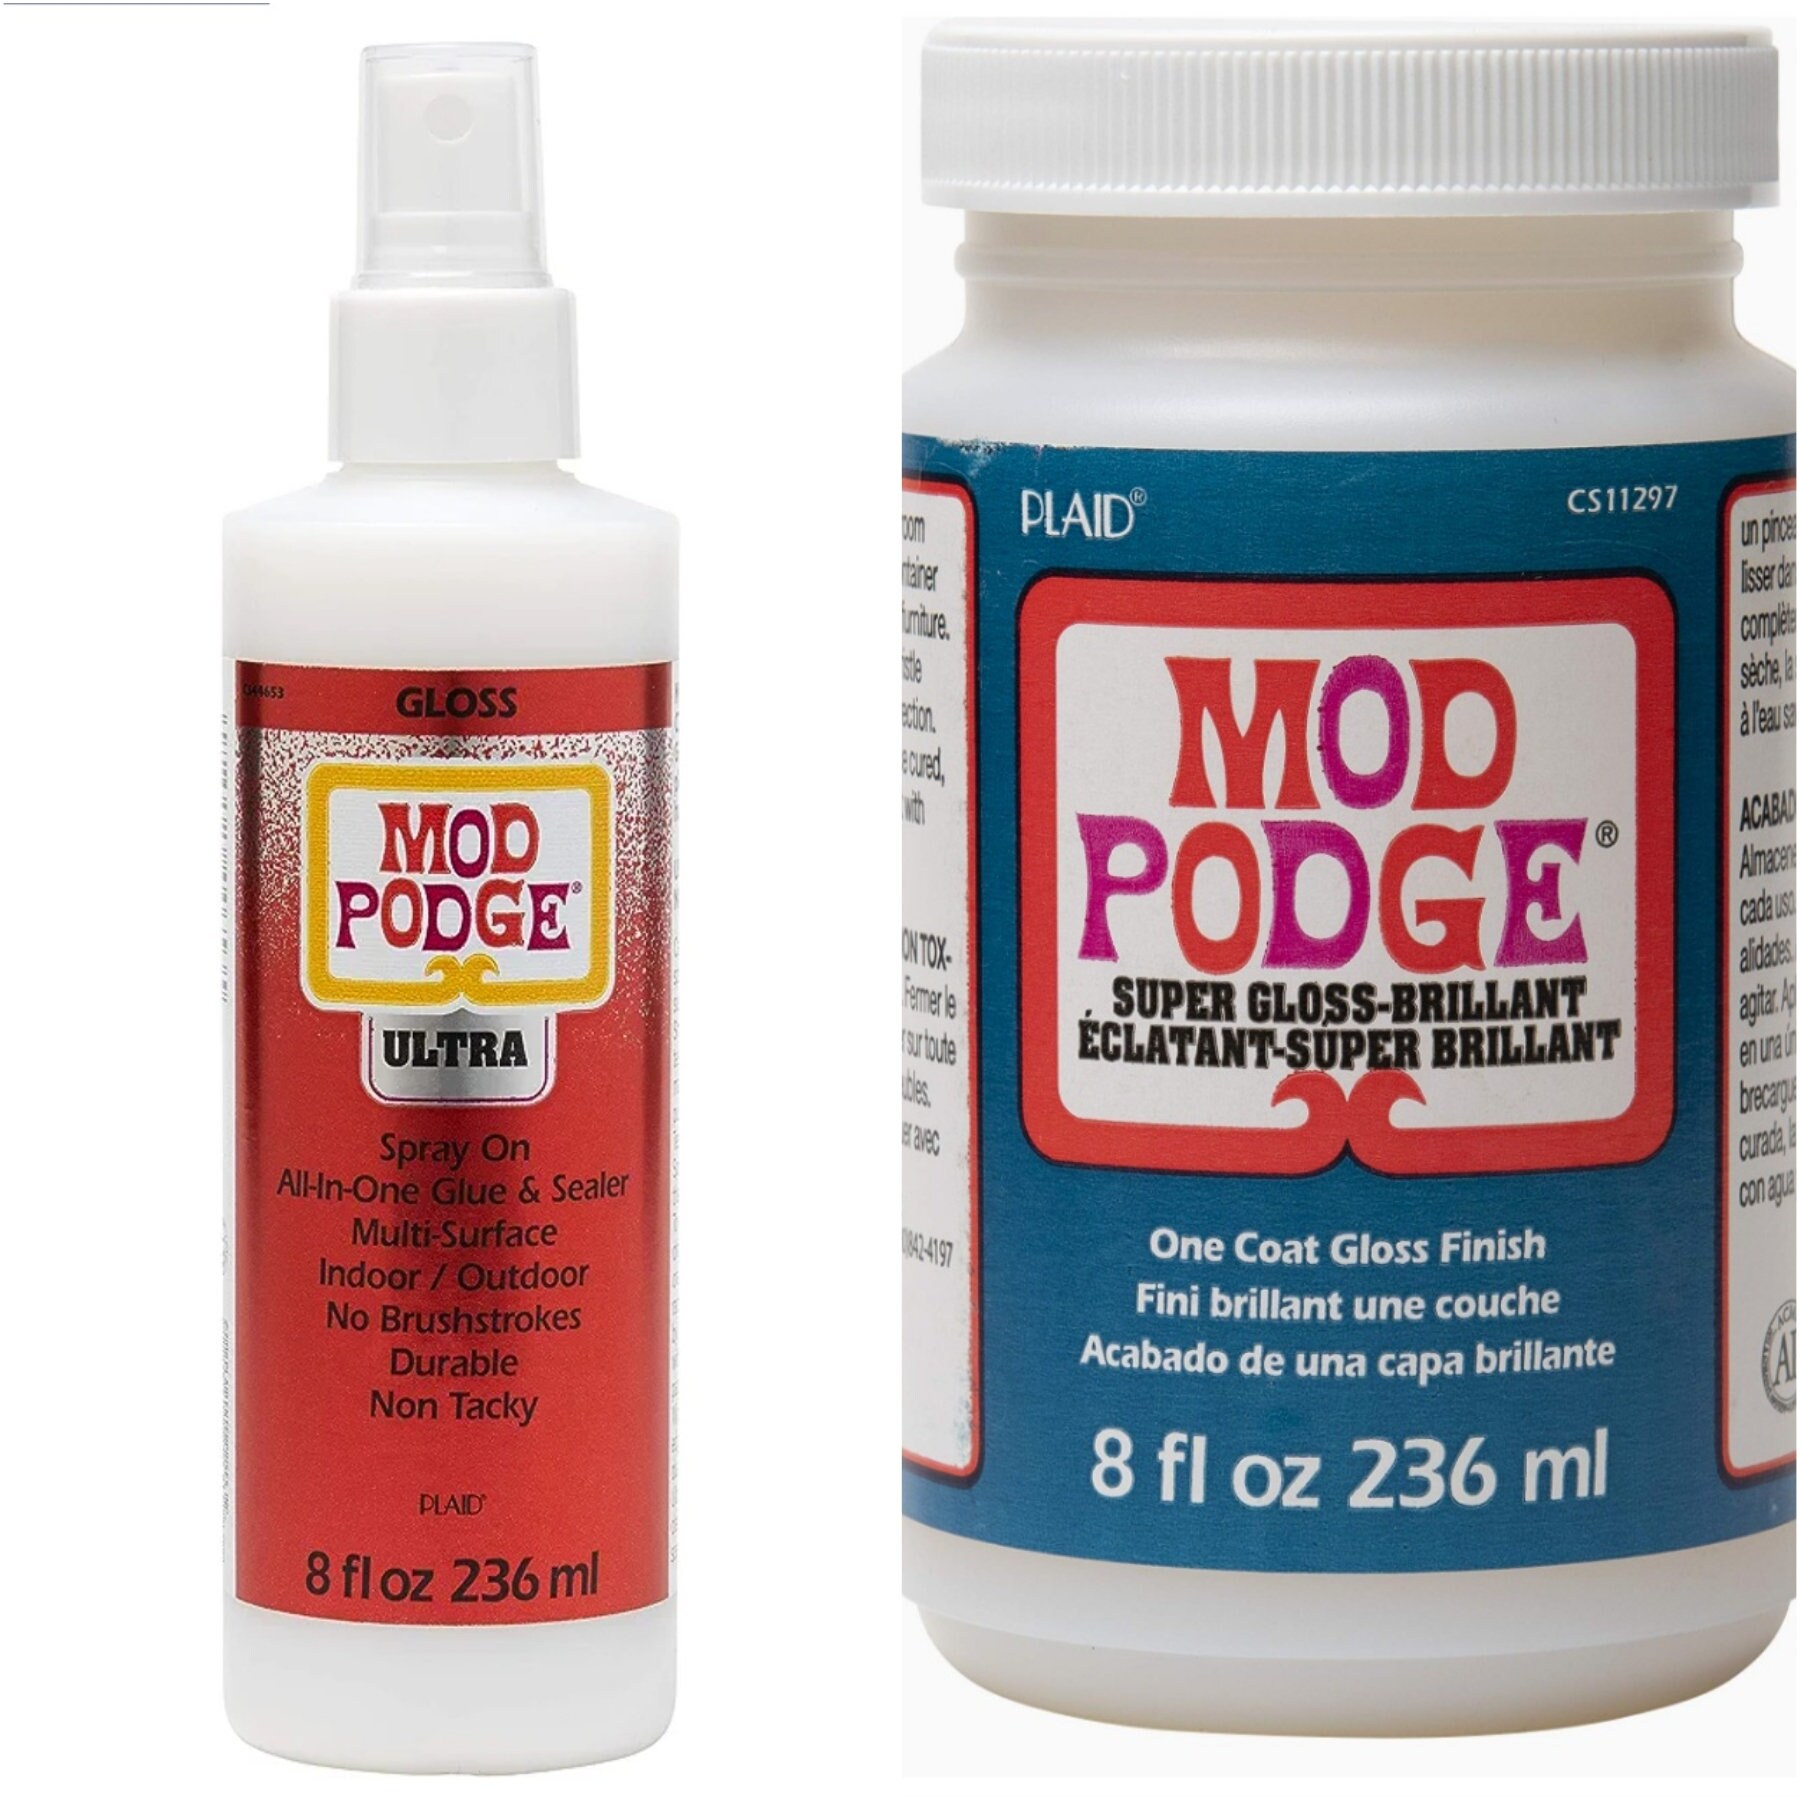 Mod Podge Gloss Waterbase Sealer, Glue & Decoupage Finish, 32 oz, Pixiss Accessory Kit with Silicone Spreaders, Gloves, Spreaders, Brushes